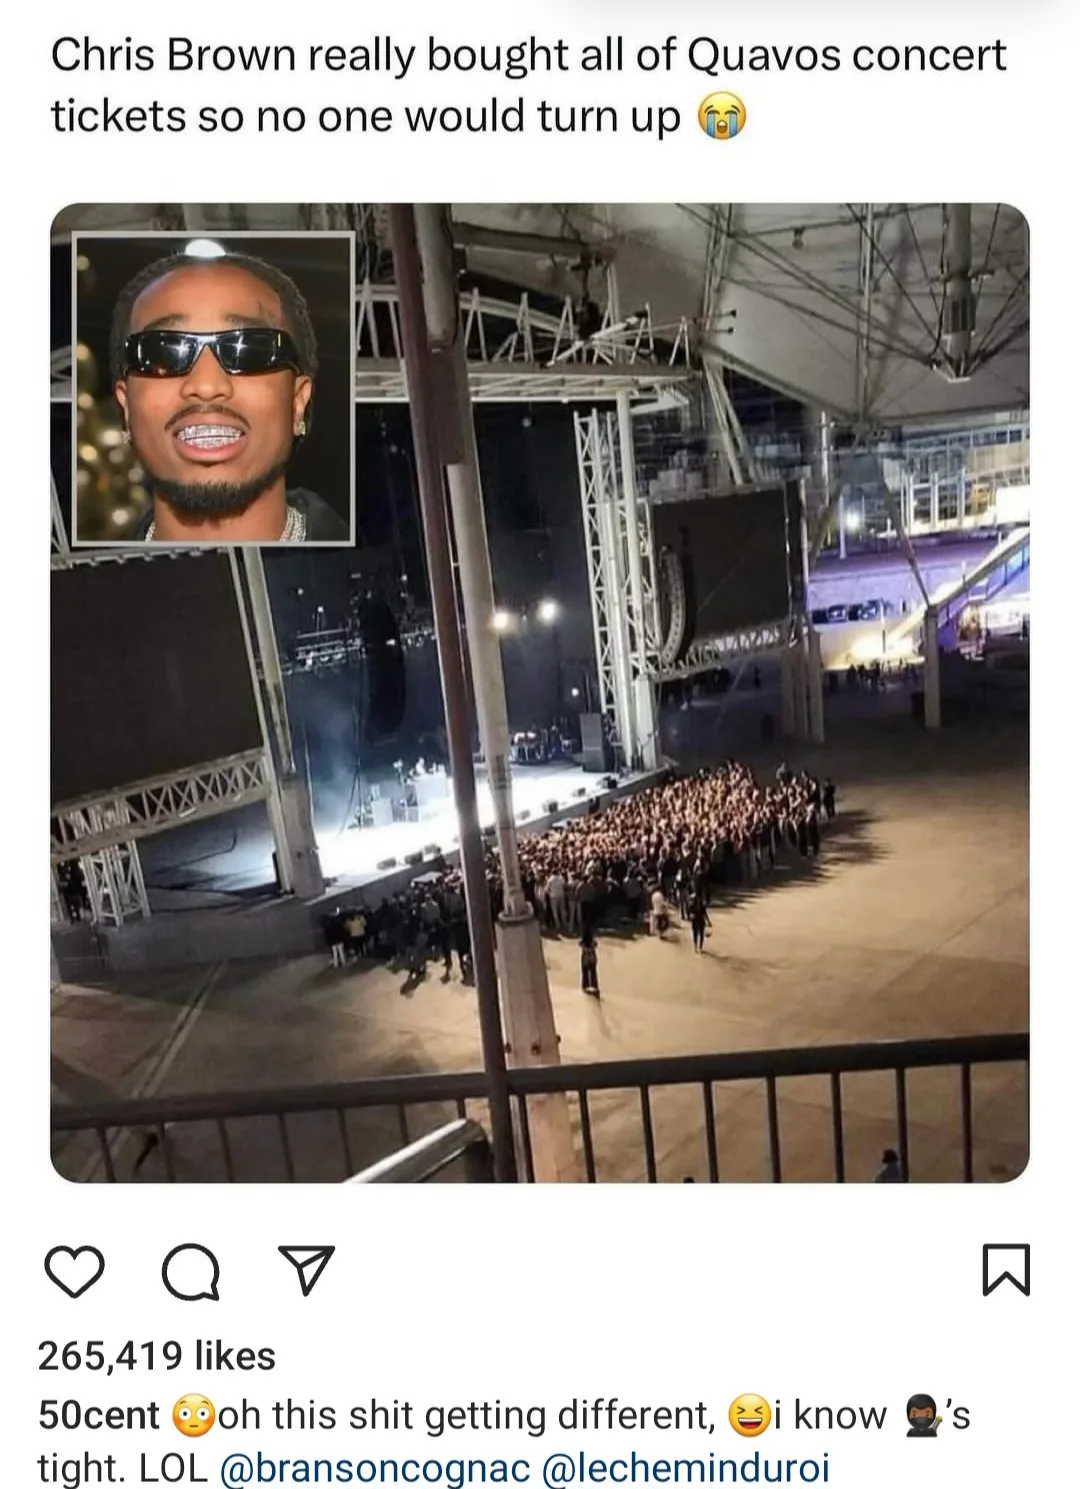 Chris Brown accused of buying all of Quavo’s concert ticket so no one would turn up as the rapper performs to almost empty arena